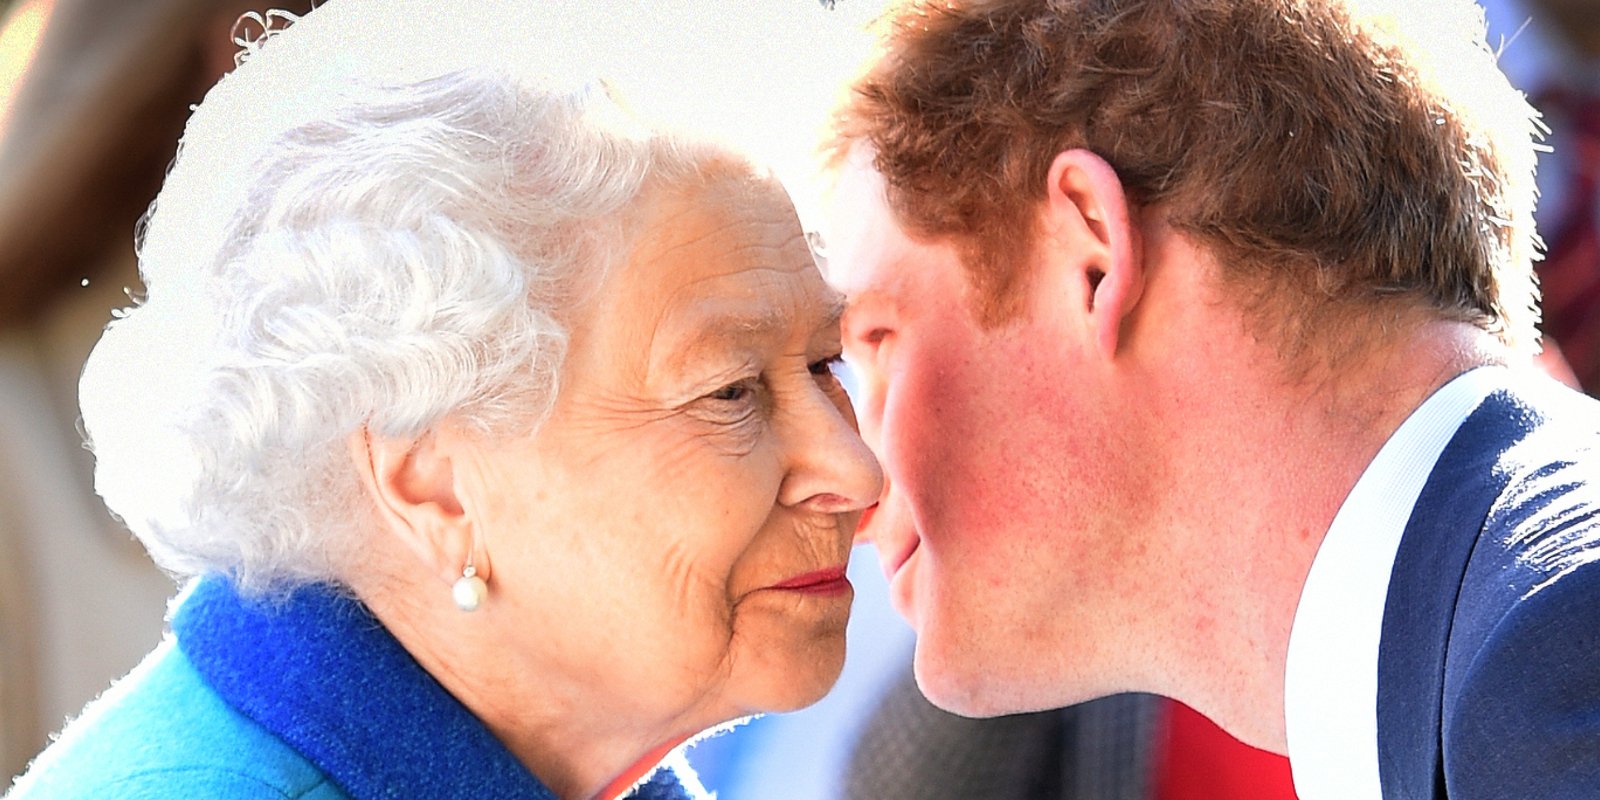 Queen Elizabeth and Prince Harry with their heads close together at Royal Hospital Chelsea on May 18, 2015 in London, England.